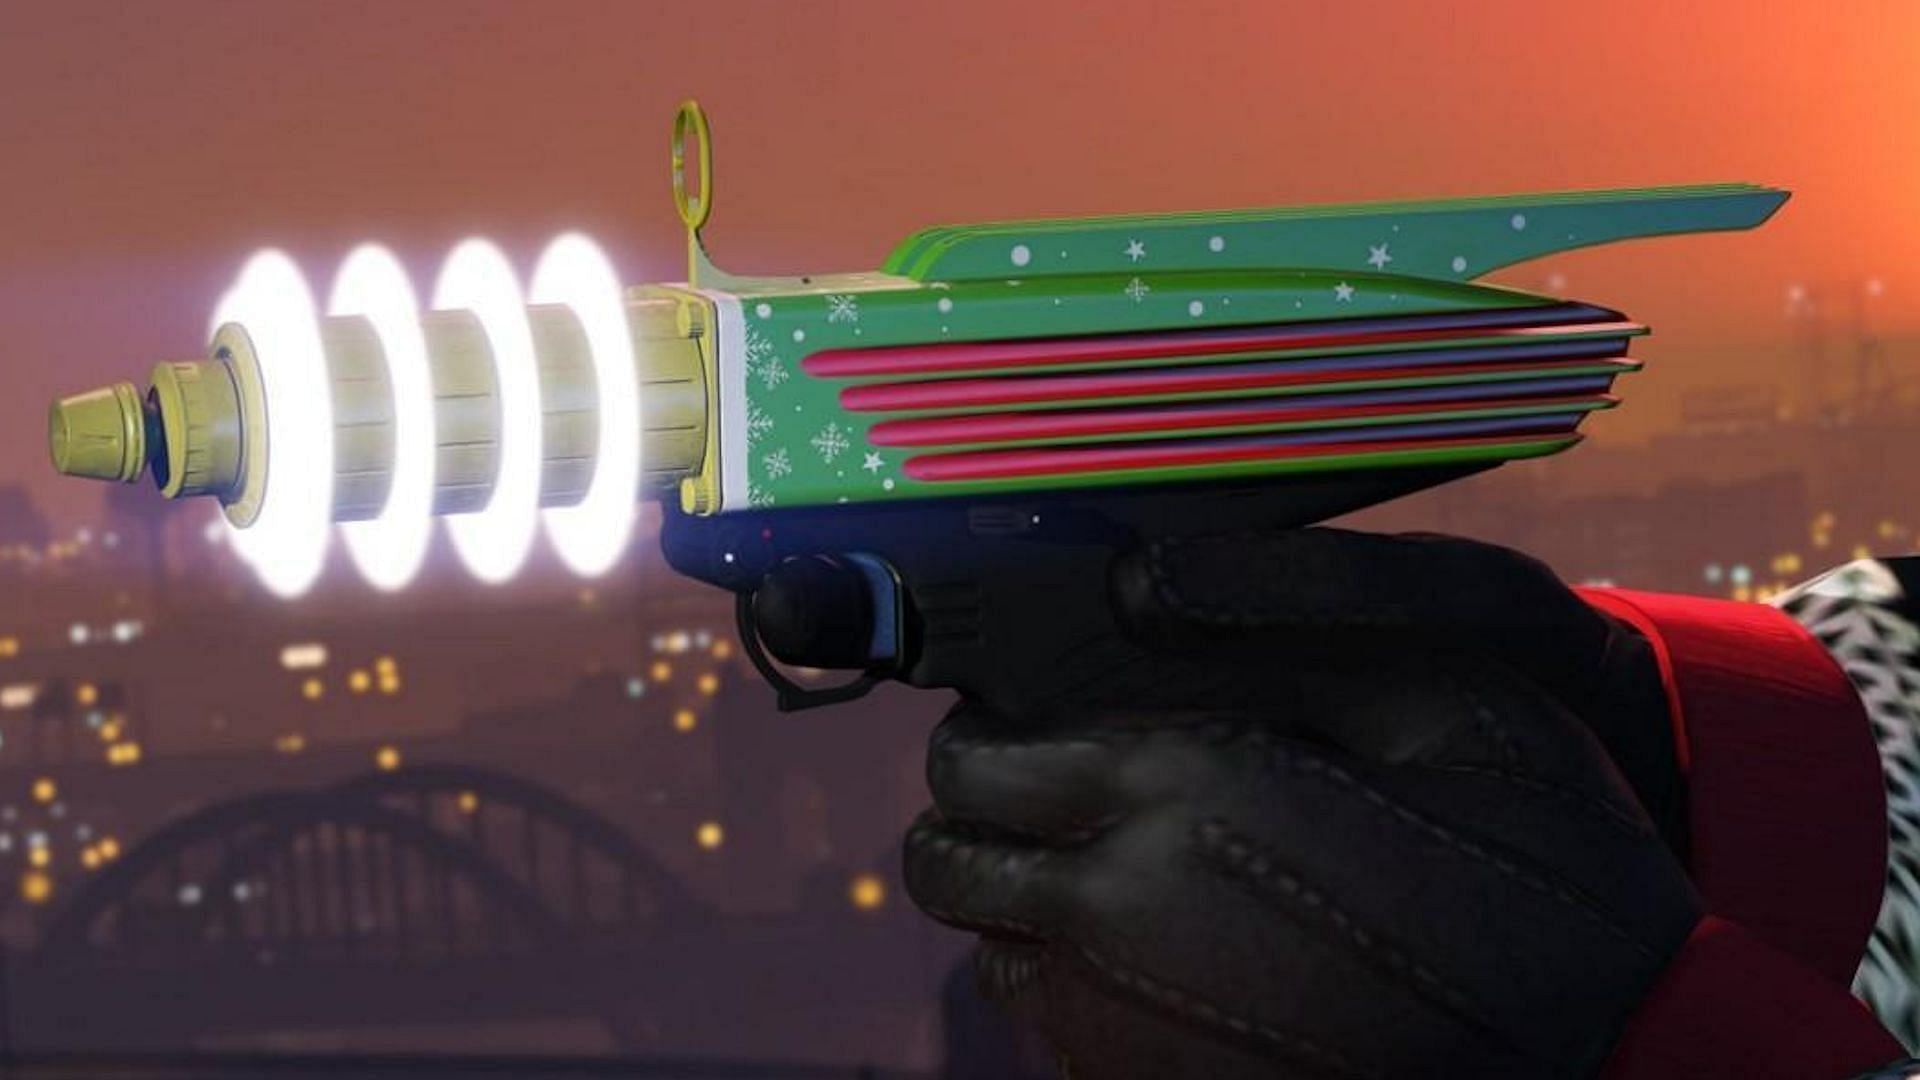 The Up-n-Atomizer has an interesting design that sticks out compared to most realistic guns (Image via Rockstar Games)